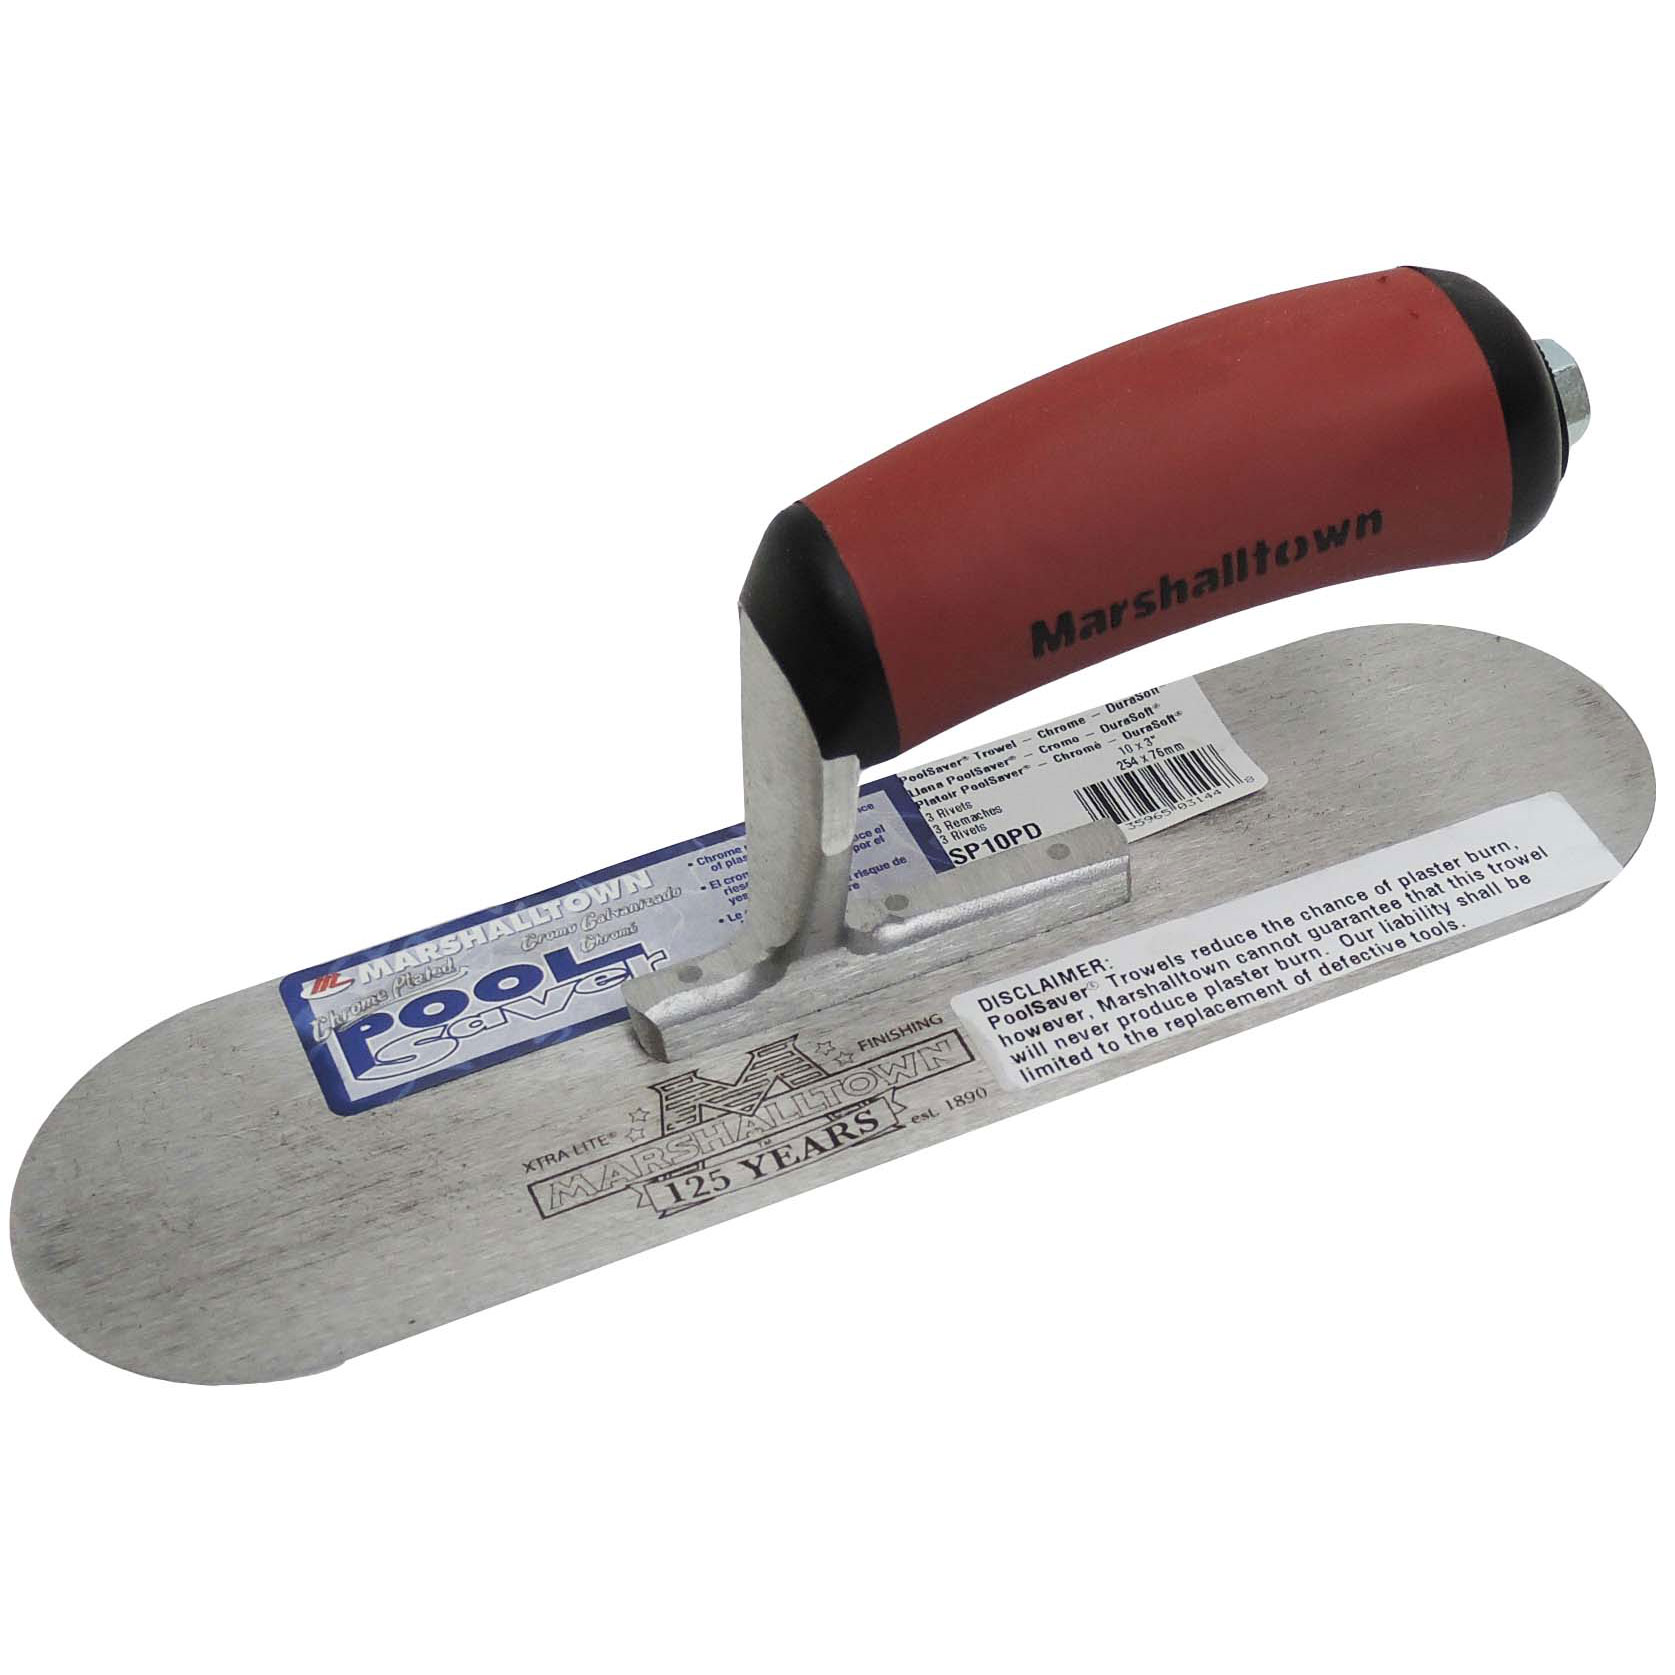 Marshalltown SP10PD 10in x 3in PoolSaver Trowel with DuraSoft Handle SP10PD